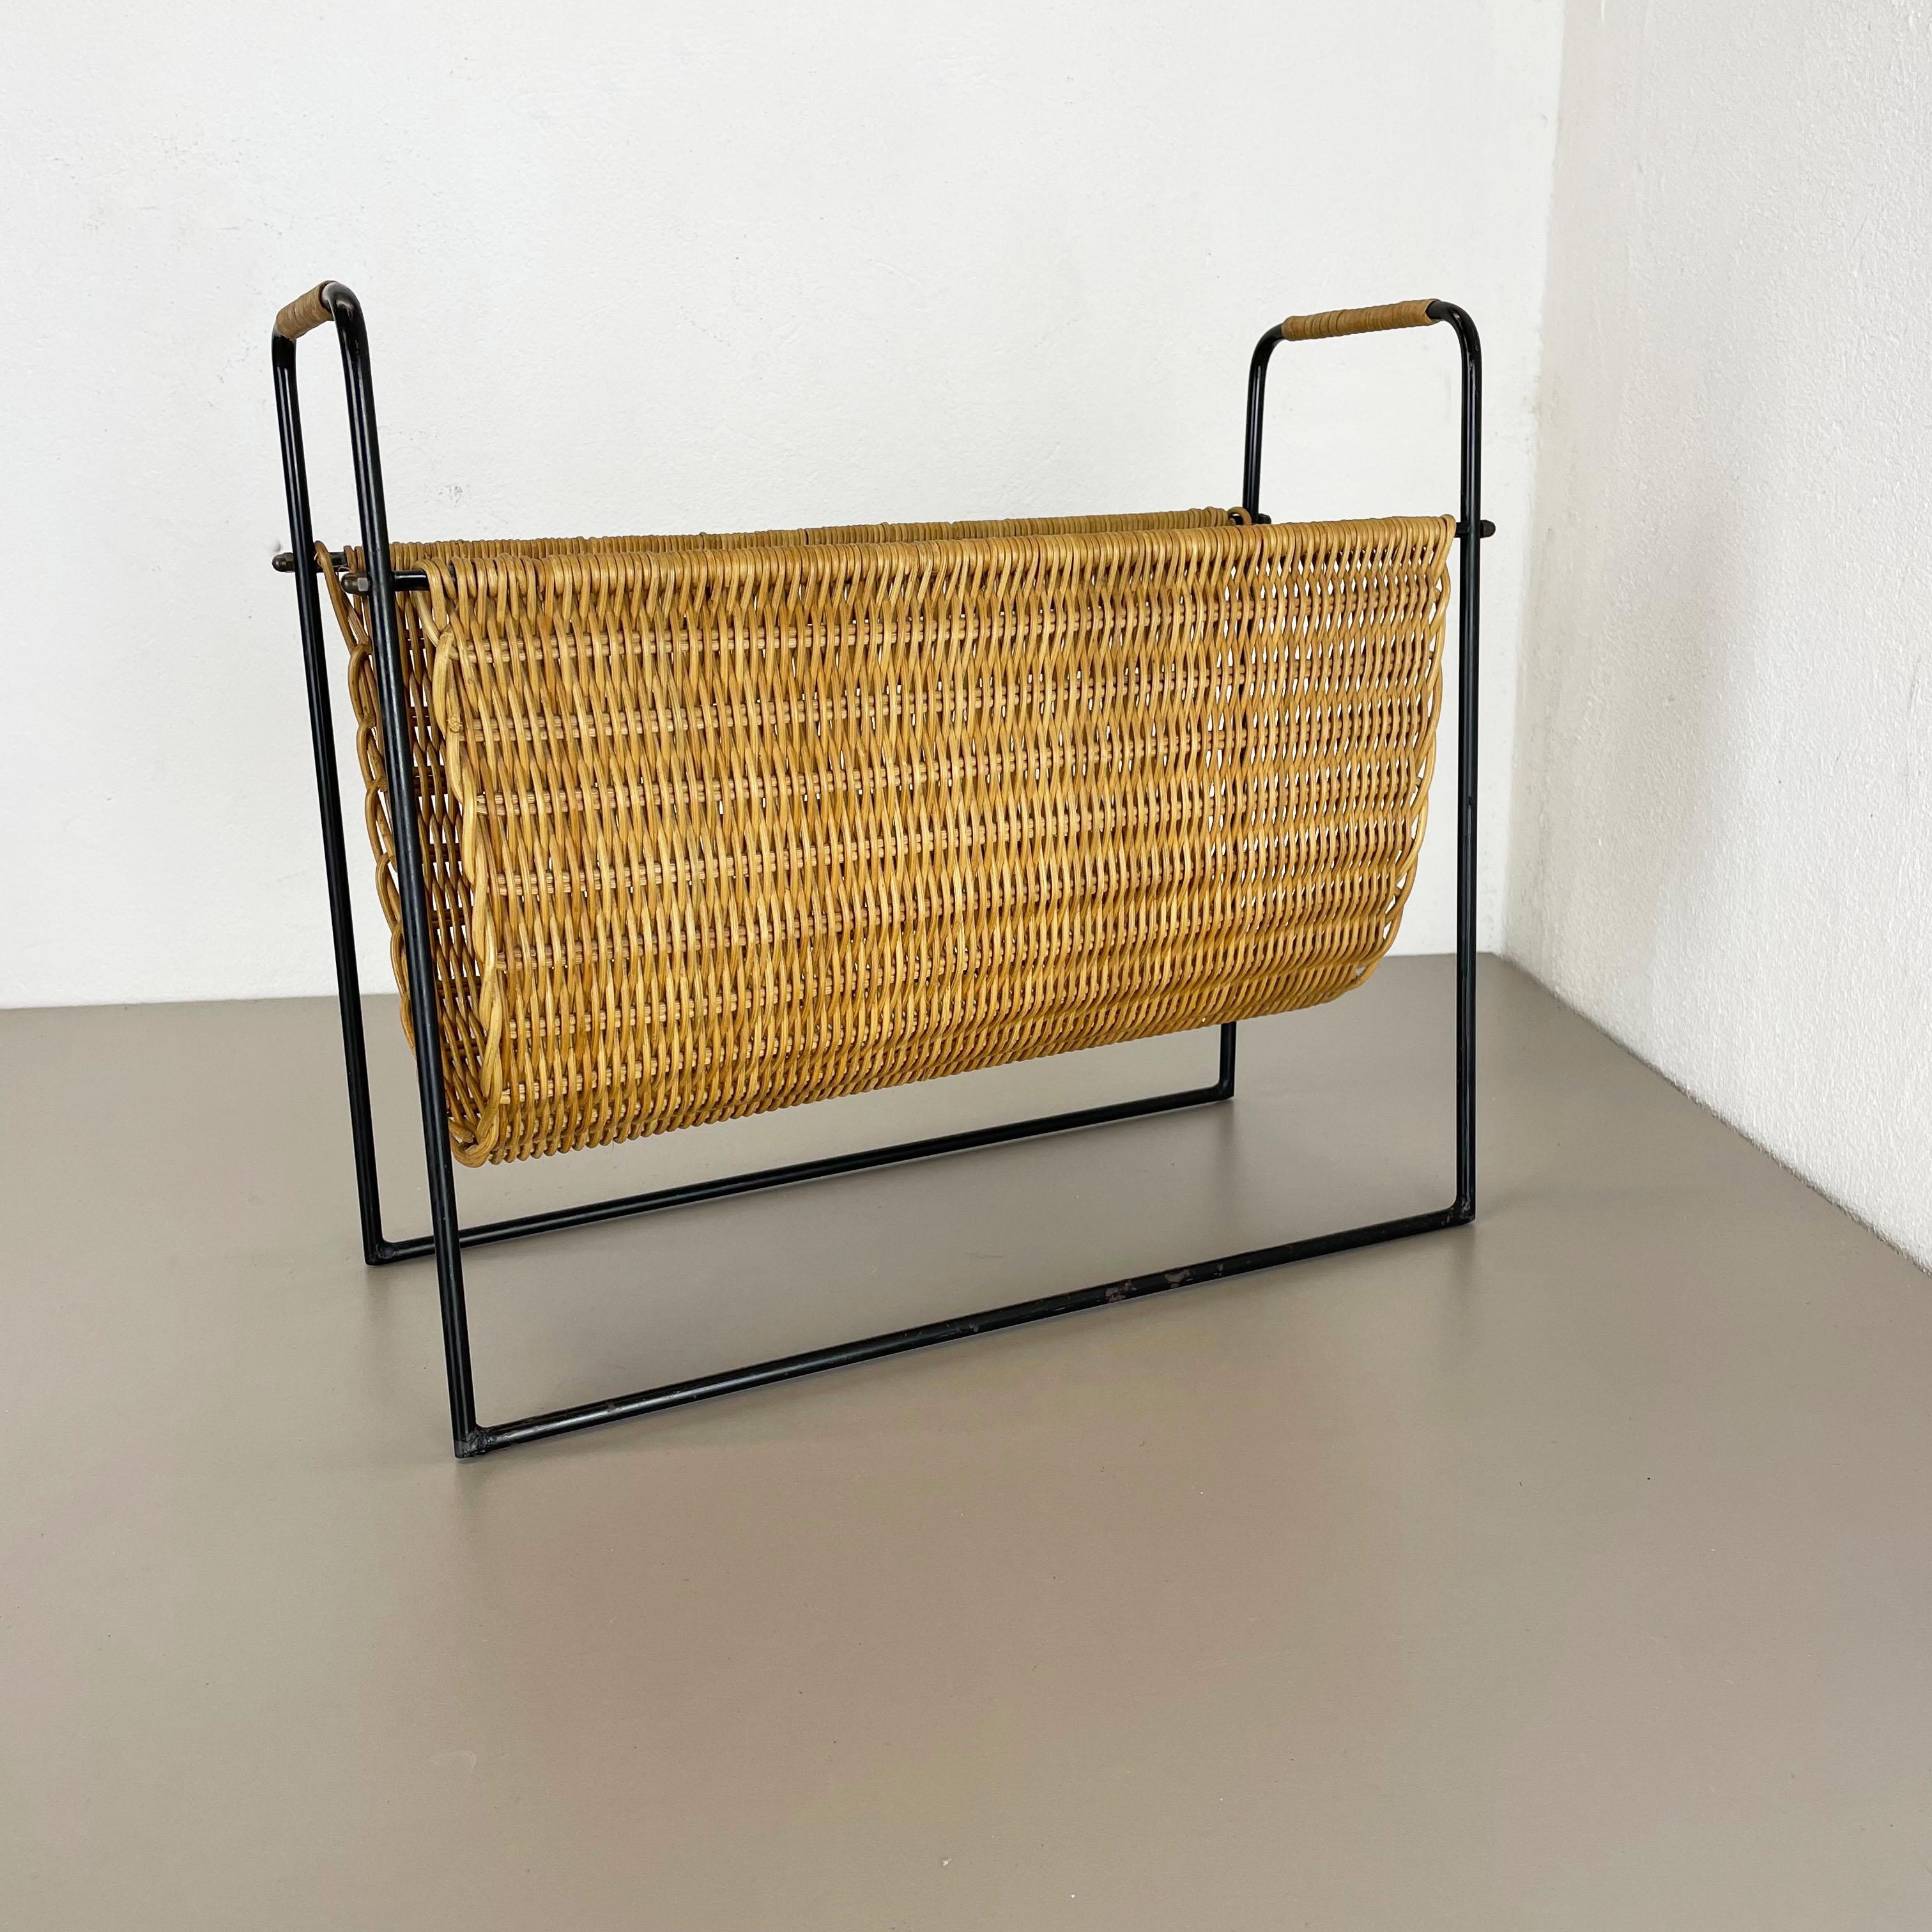 Article: magazine holder stand element

Origin: France

Age: 1970s

This original vintage Bauhaus style magazine holder stand was produced in the 1950s in France. It is made of natural rattan in a oval formed shape and at the top left and